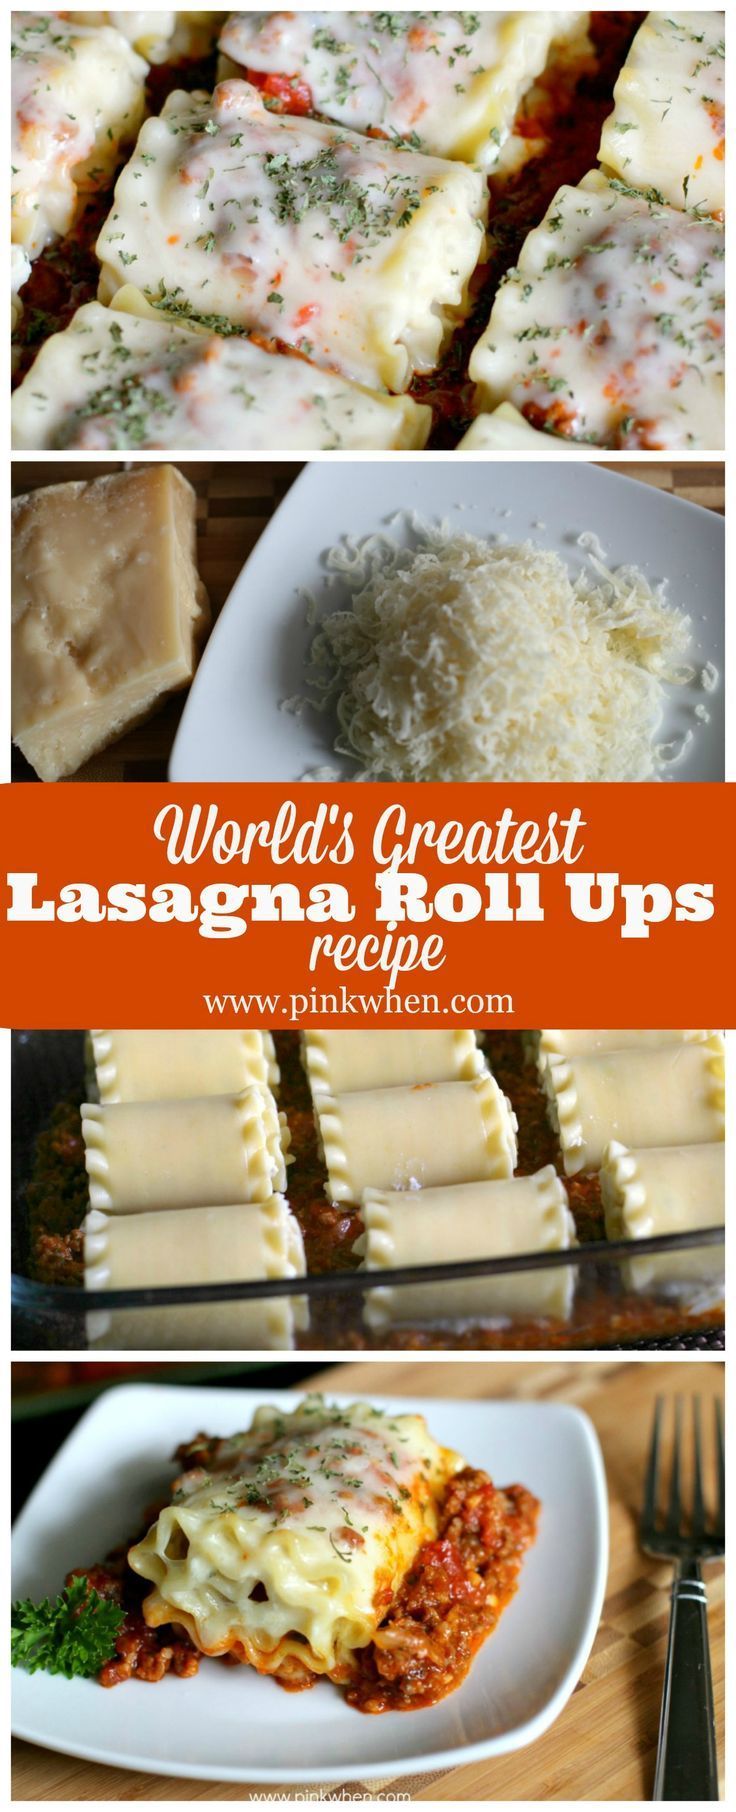 You NEED to make this recipe. It’s the most amazing Lasagna Roll Ups recipe around.: